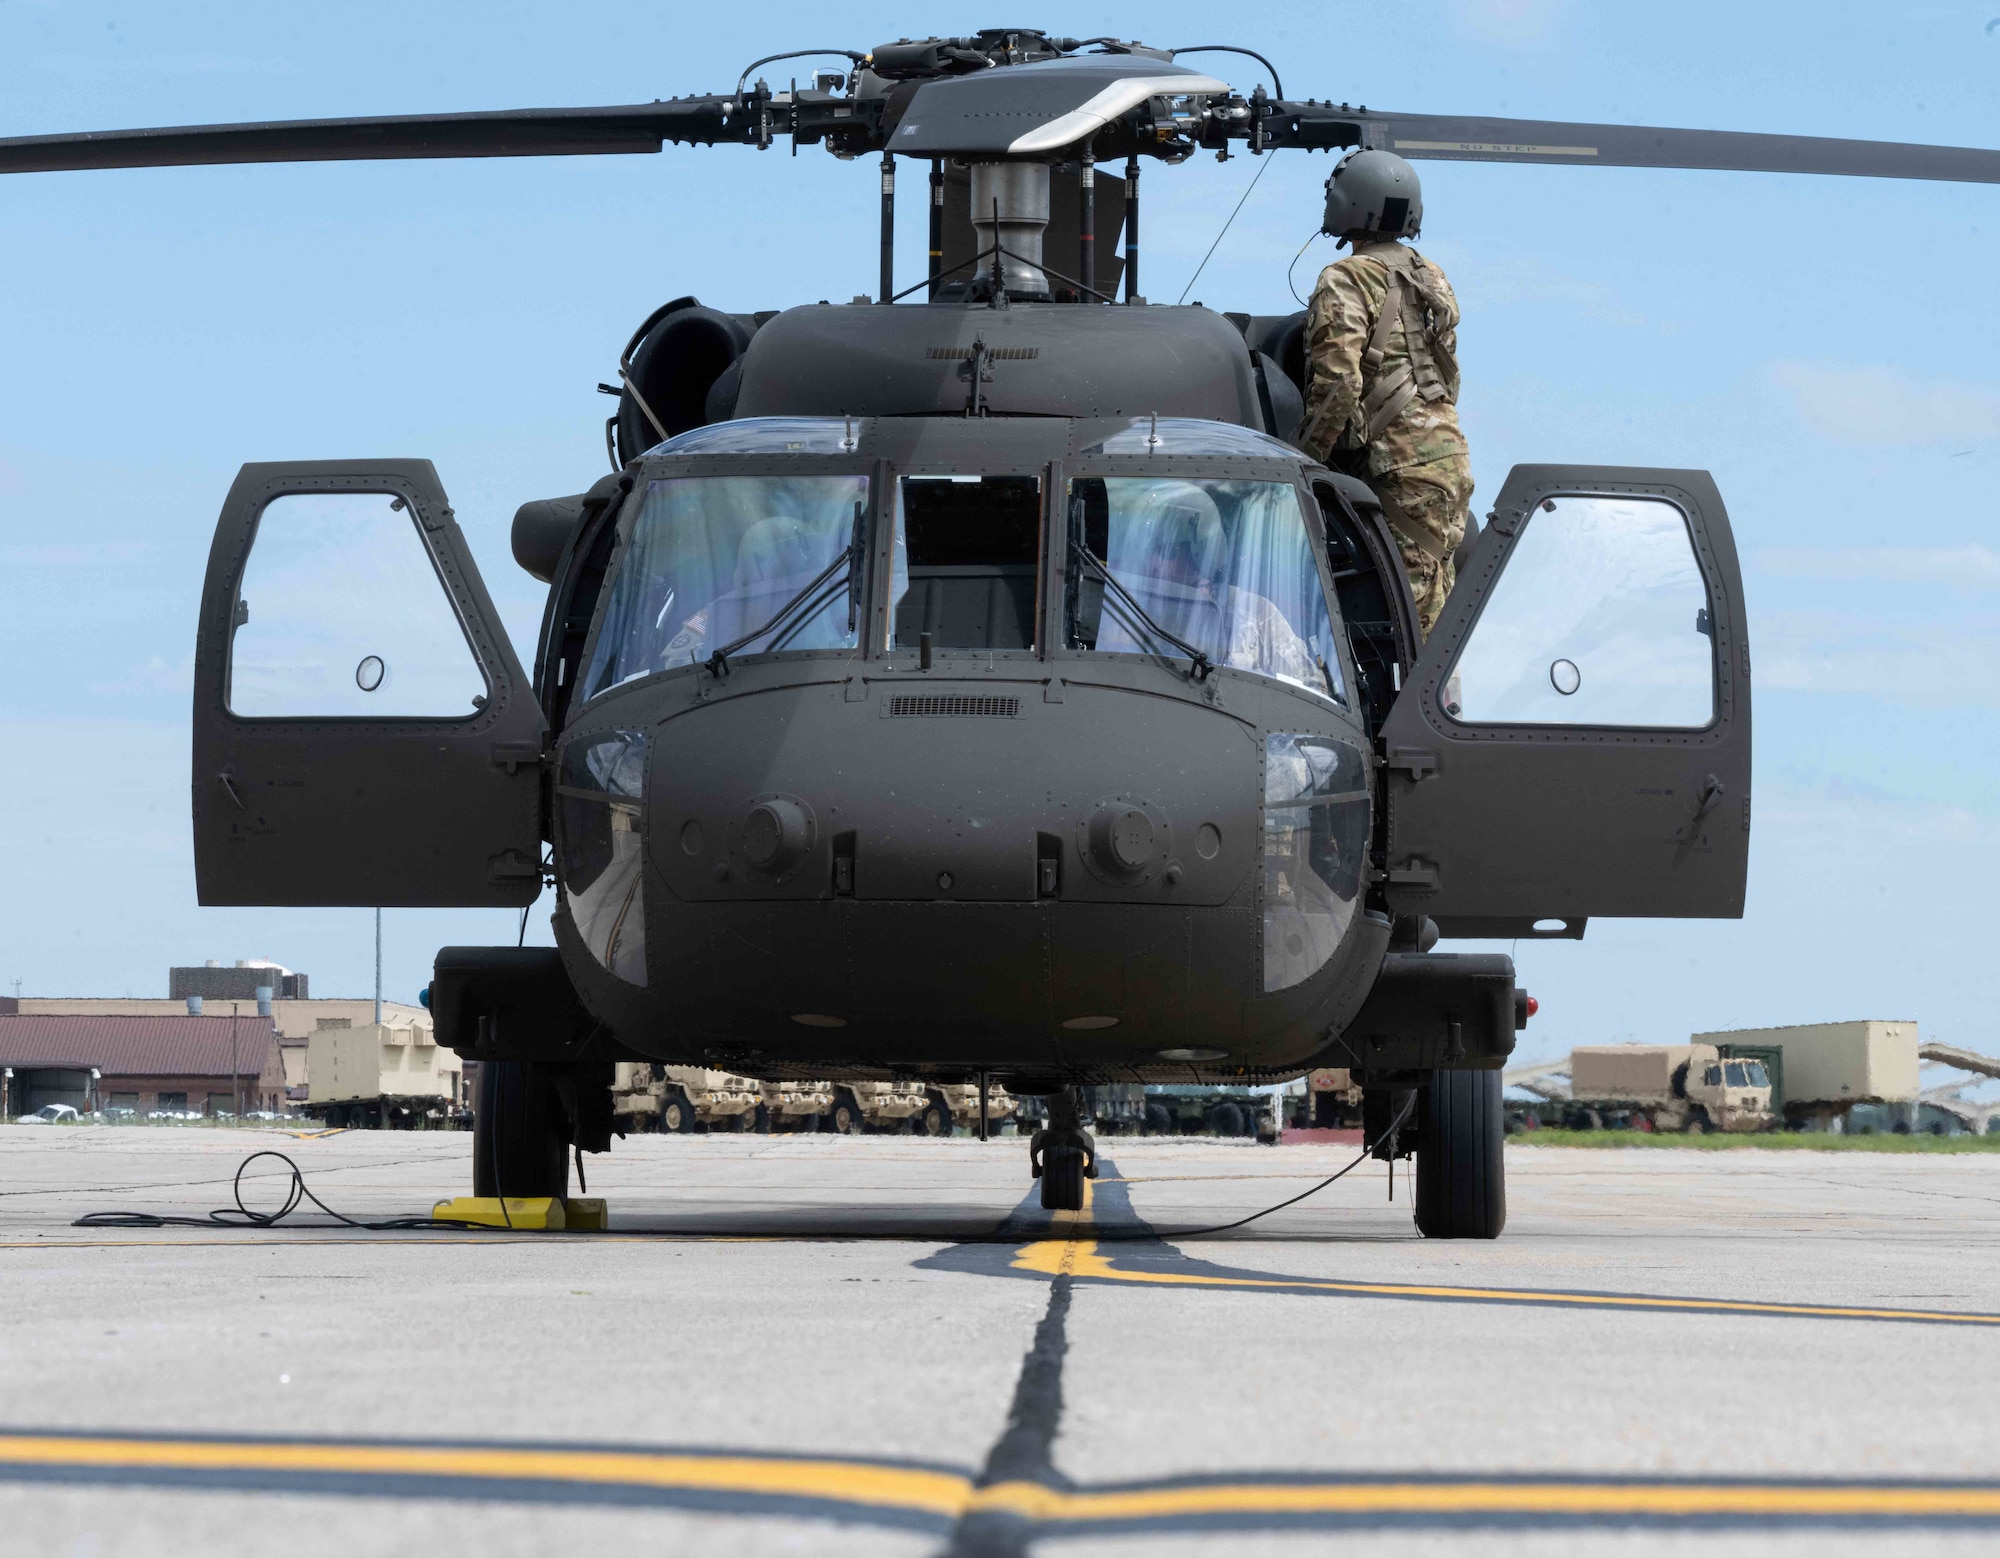 A UH-60 Black Hawk assigned to the 1-135th Assault Helicopter Battalion, Missouri National Guard, prepares for takeoff on the runway on Whiteman Air Force Base, Mo. on June 22, 2022. The 1-135th mobilizes and deploys on order to a theater of operations and conducts unified land operations in joint and coalition environments supporting a Regional Combatant Commander or provides defense support to civil authorities within the United States as directed. (U.S. Air Force photo by Airman 1st Class Bryson Britt)